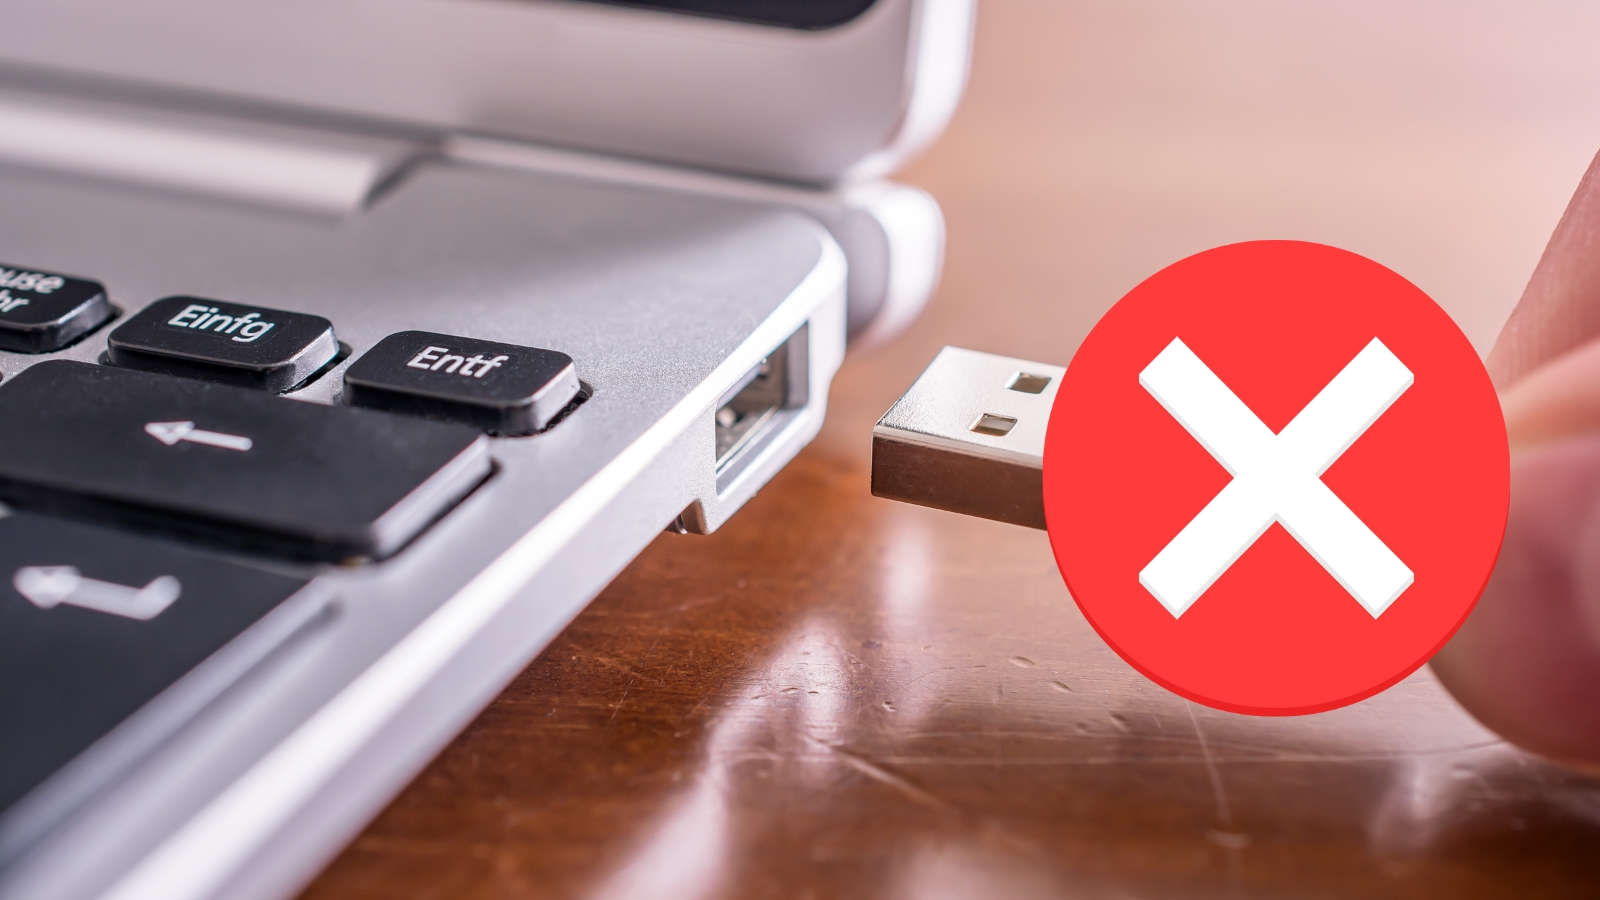 The Importance of Safely Ejecting Your USB Drive